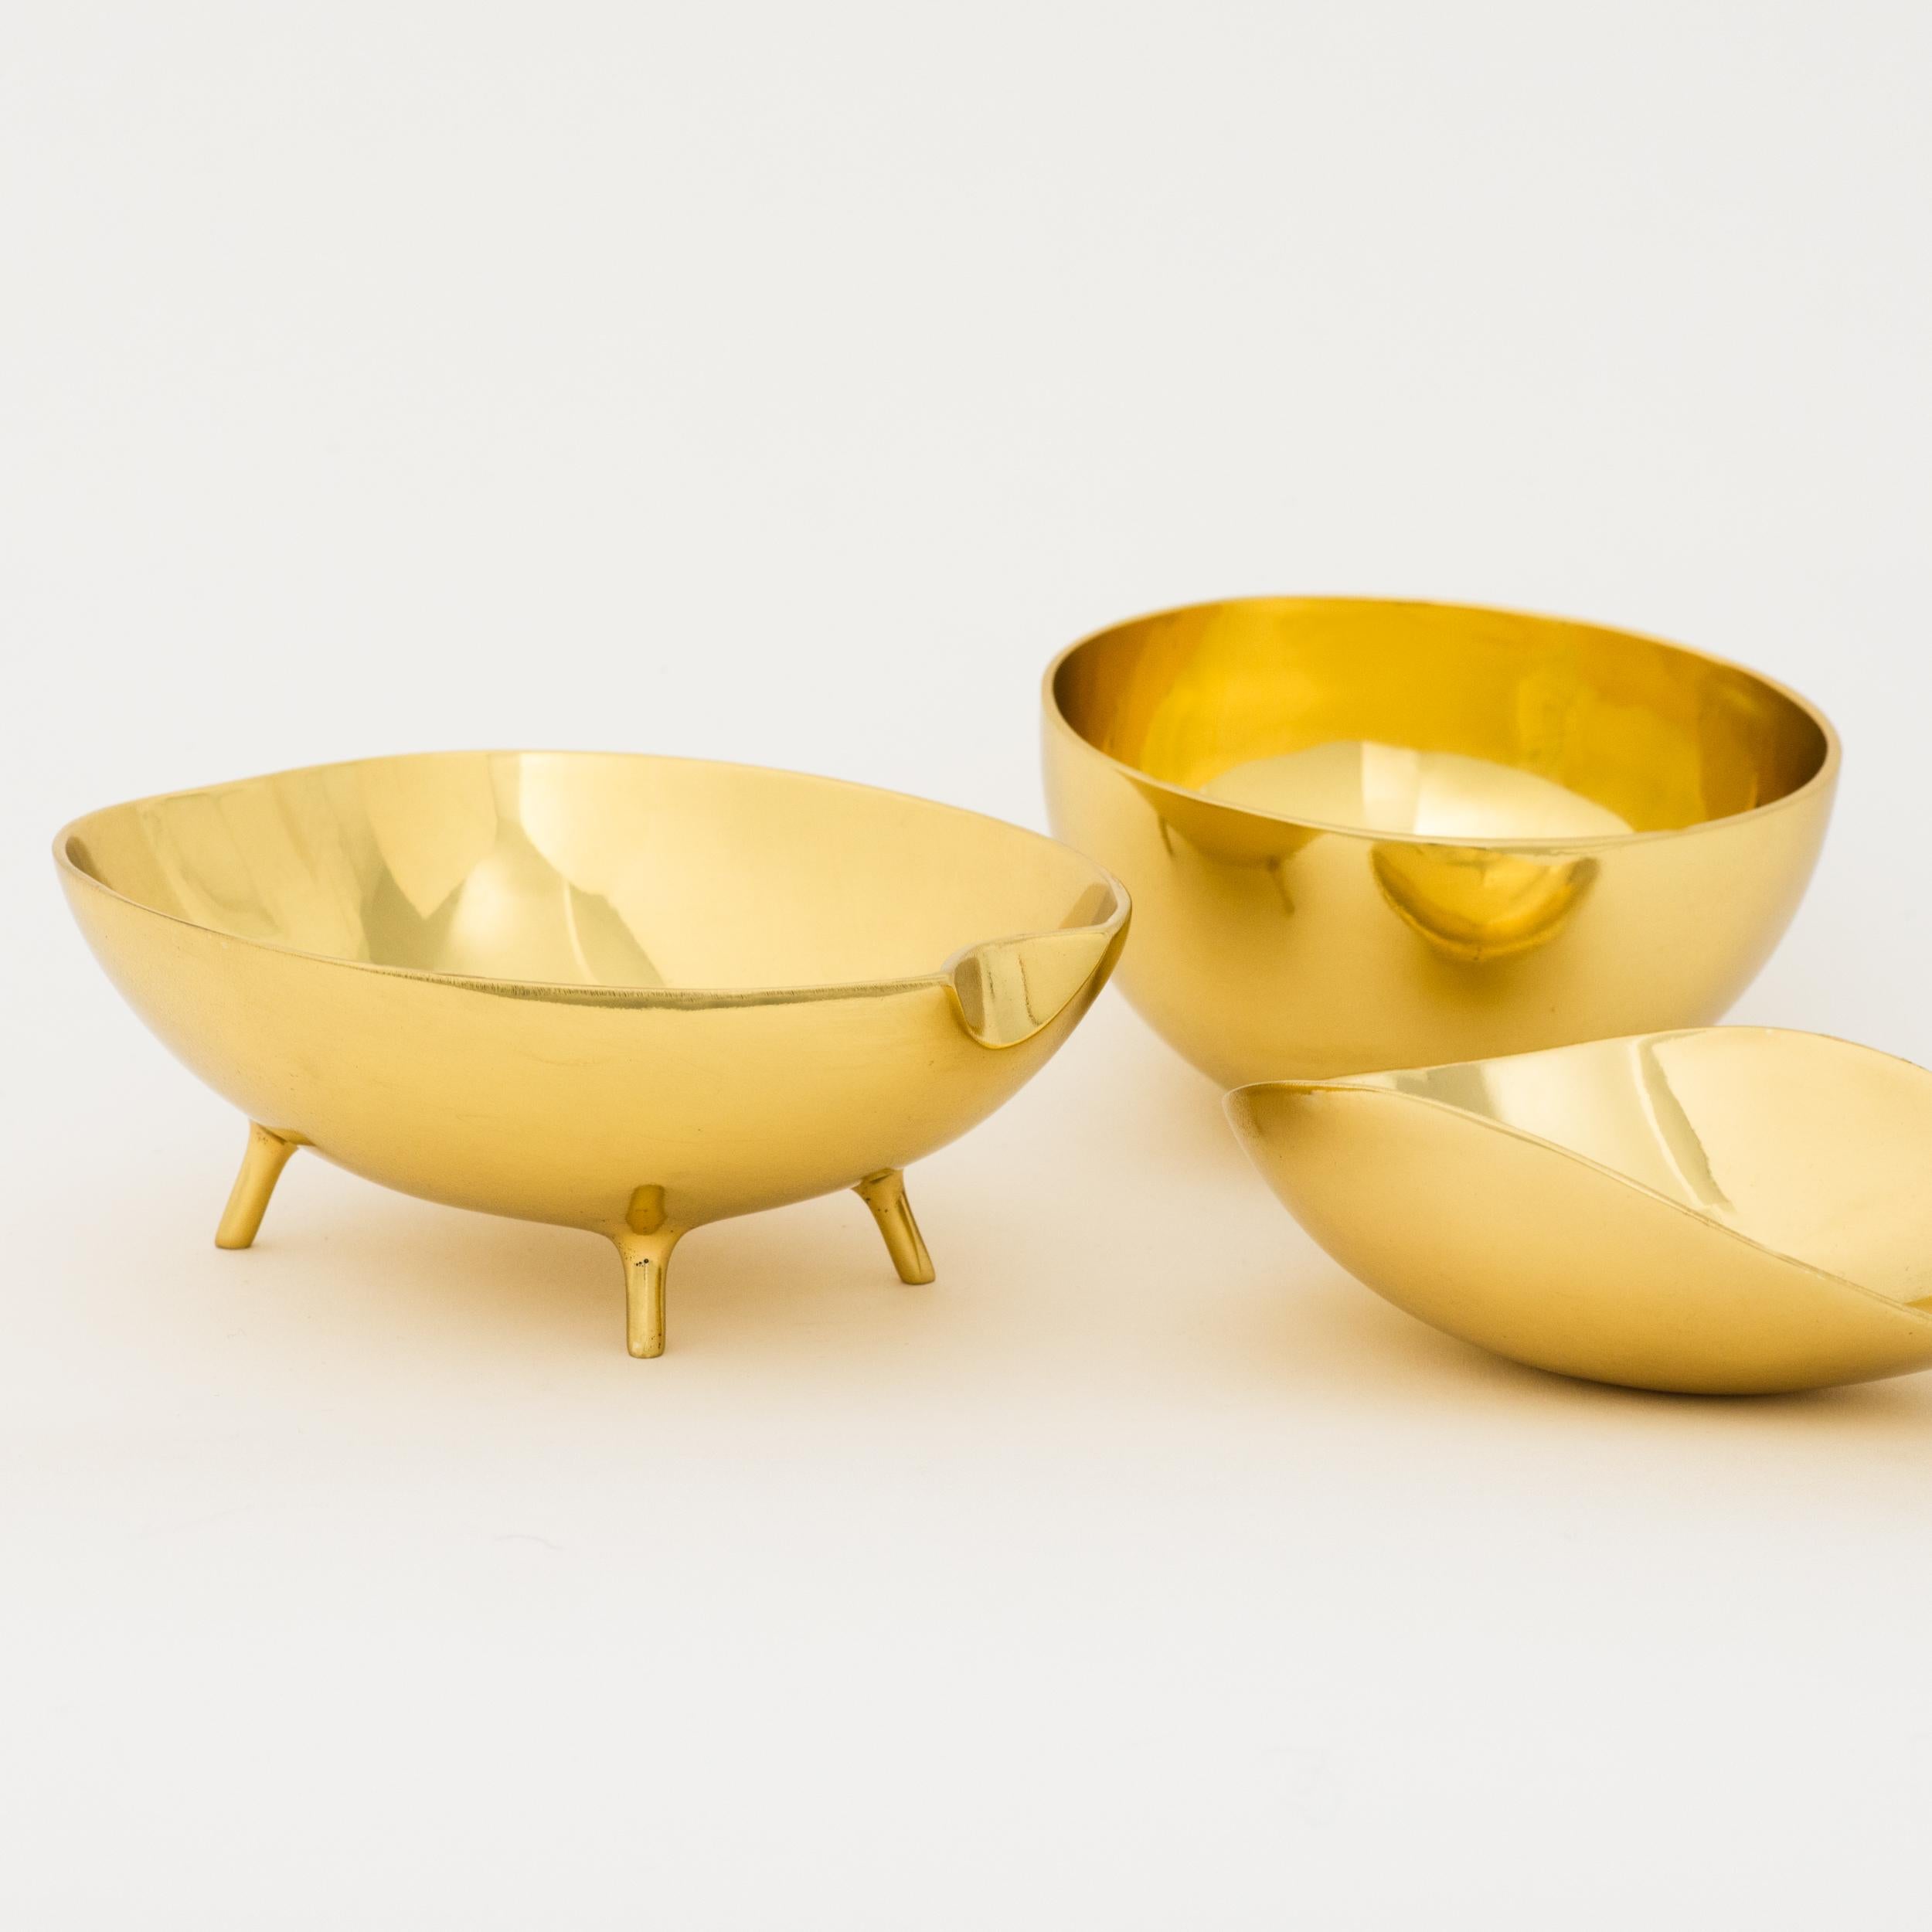 Set of three mixed handmade polished cast brass decorative bowls.

Each of those original and elegant bowls are handmade individually. Cast using very traditional techniques.

Slight variations in polished finishes, patterns and sizes are